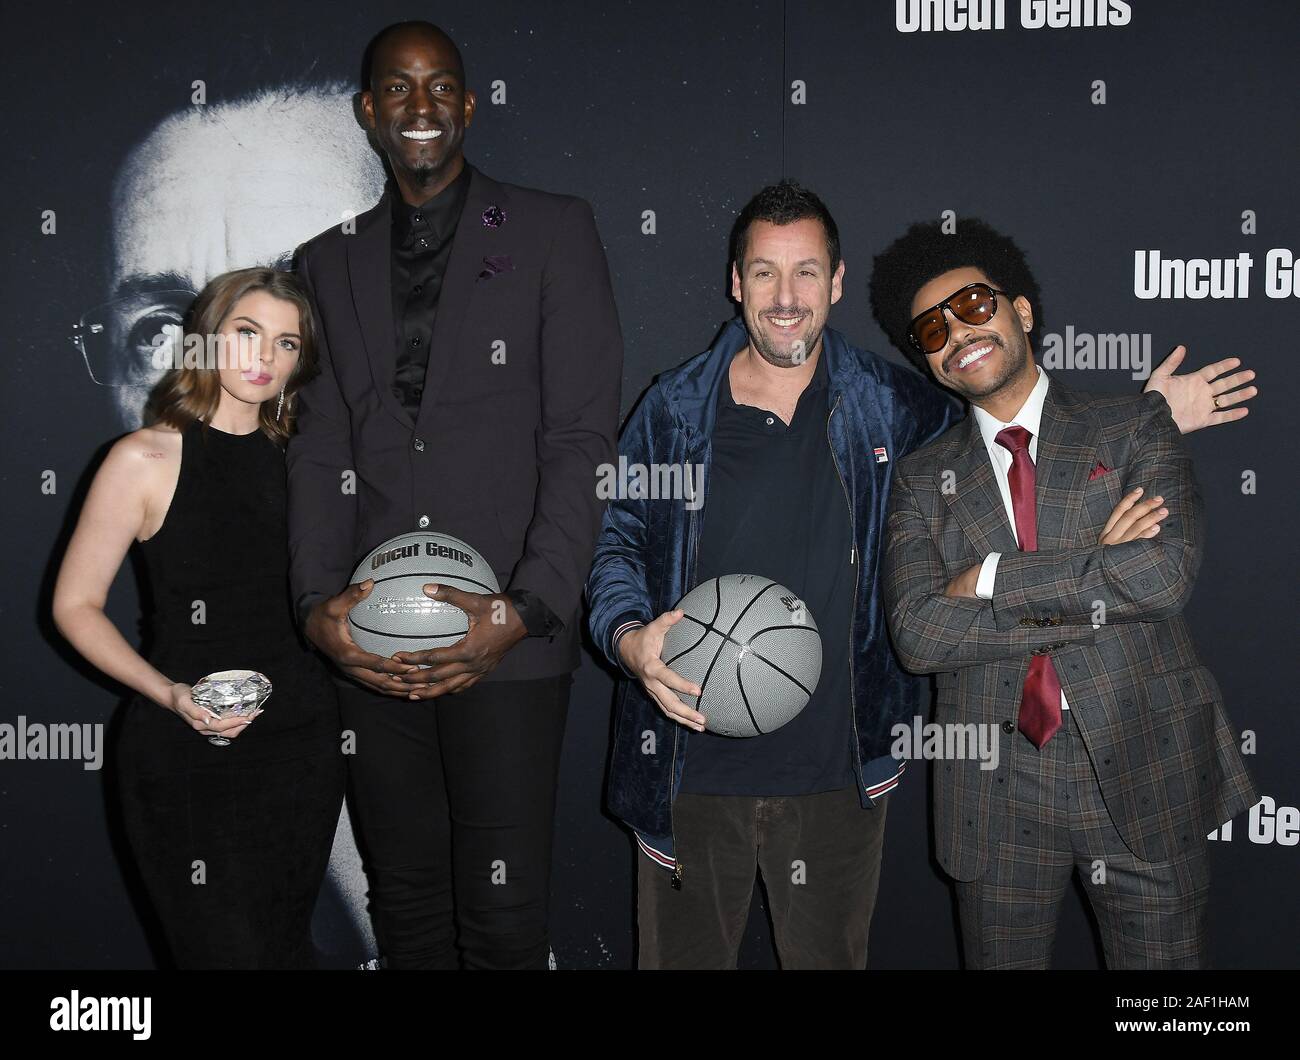 Los Angeles, USA. 11th Dec, 2019. (L-R) Julia Fox, Kevin Garnett, Adam Sandler and The Weeknd at the UNCUT GEMS Los Angeles Premiere held at the ArcLight Cinerama Dome in Los Angeles, CA on Wednesday, ?December 11, 2019. (Photo By Sthanlee B. Mirador/Sipa USA) Credit: Sipa USA/Alamy Live News Stock Photo